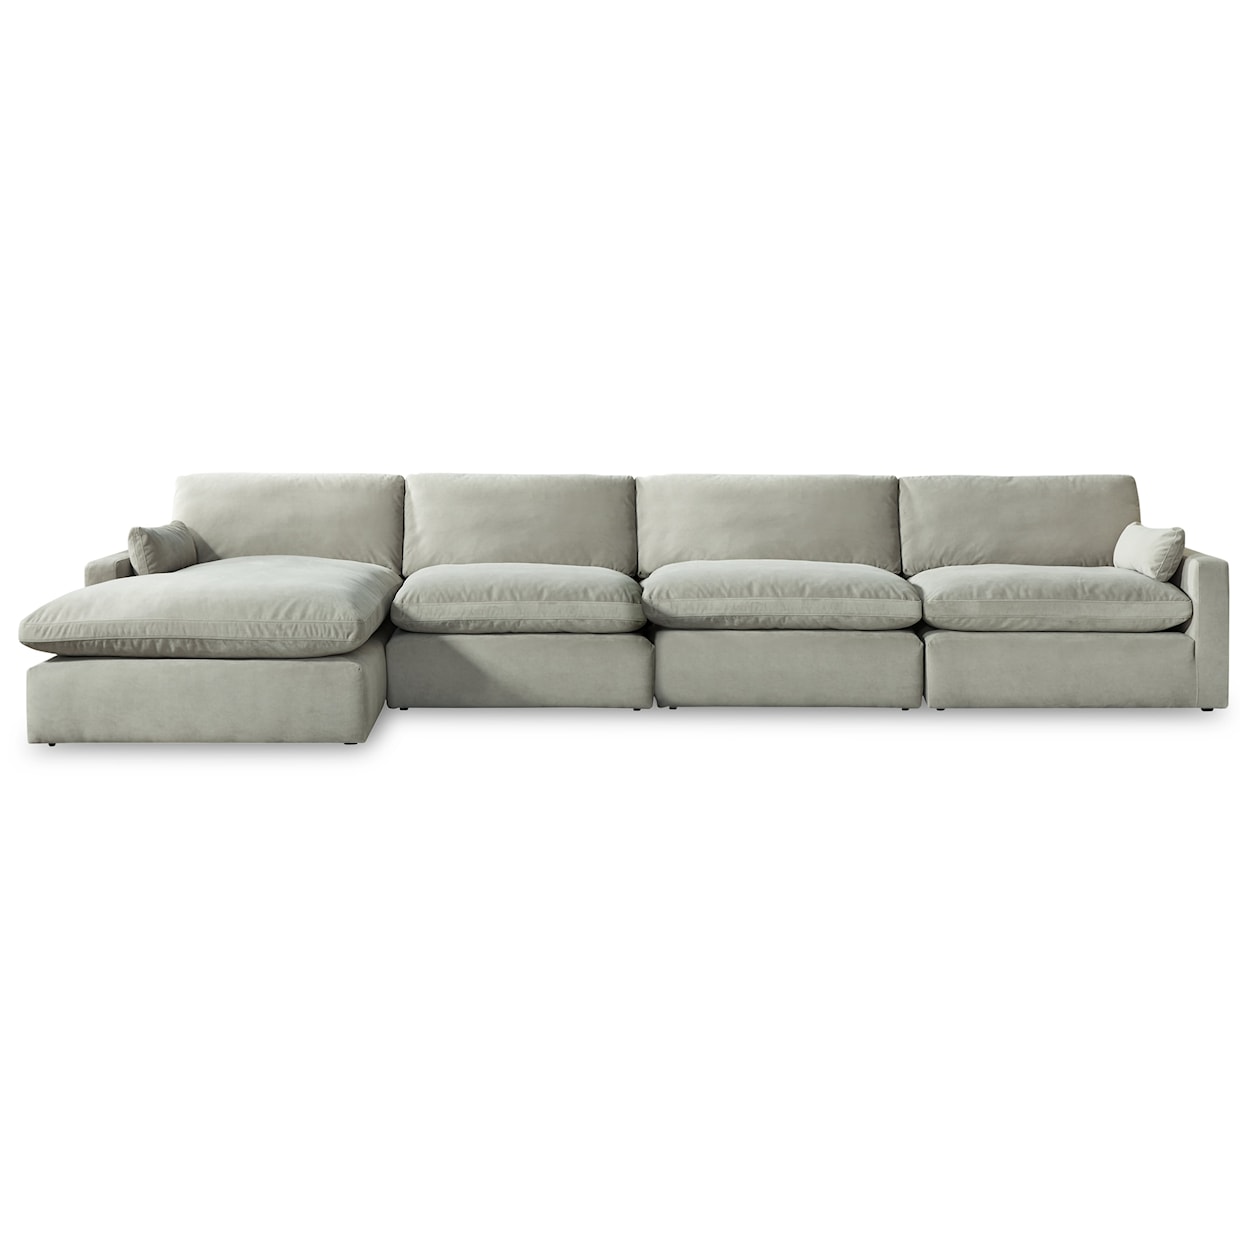 Signature Design by Ashley Sophie 4-Piece Sectional With Chaise